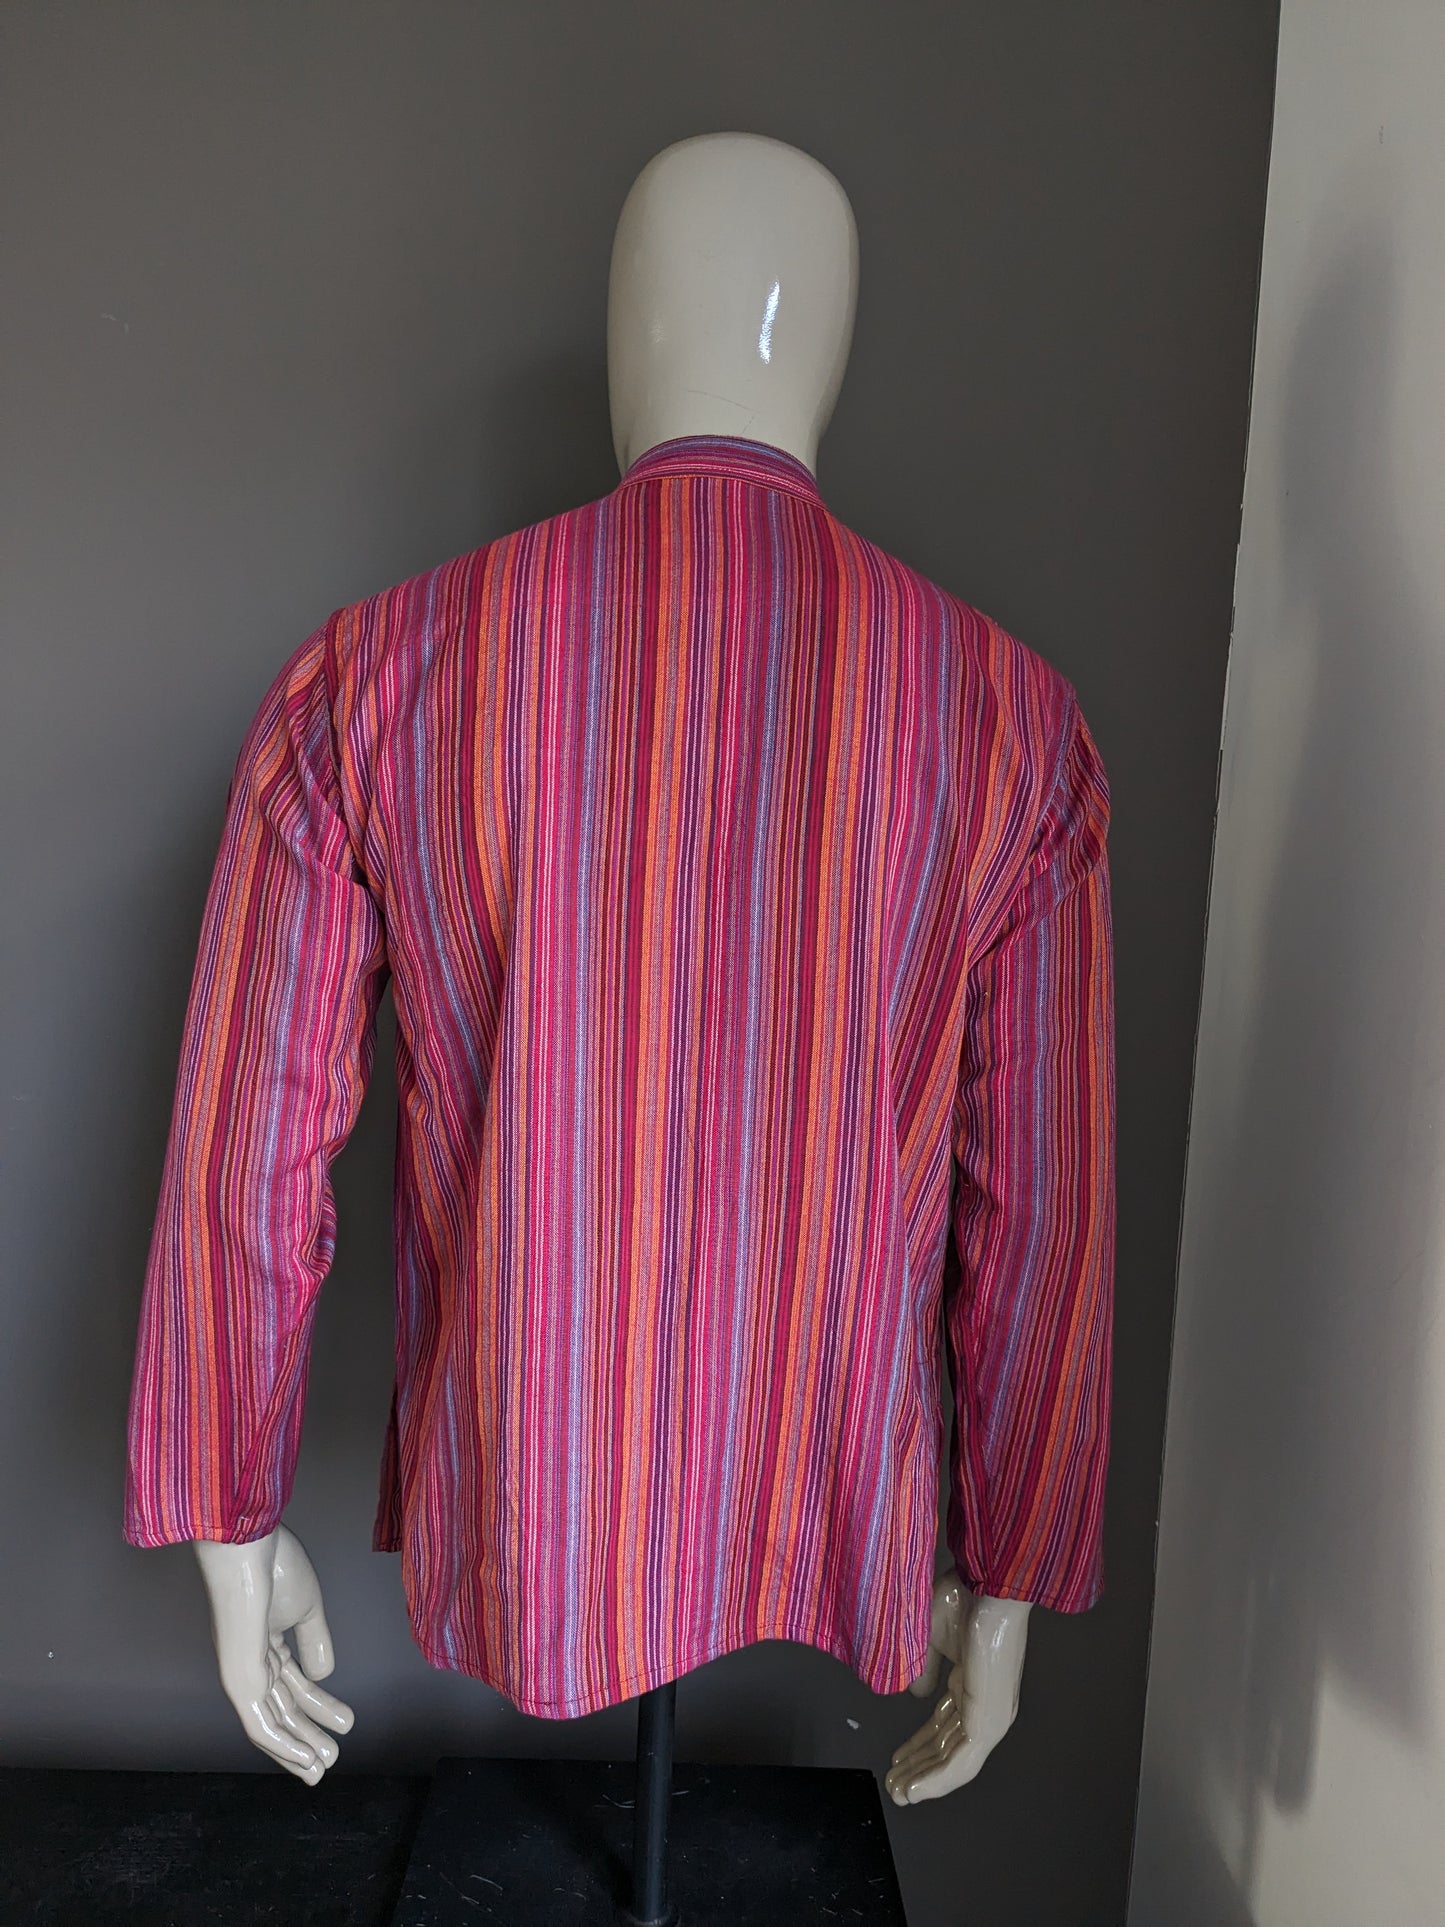 Vintage Modas Baghdad Polotrui / Shirt with Mao / Standing / Farmer Collar. Red / colored striped. Size L.